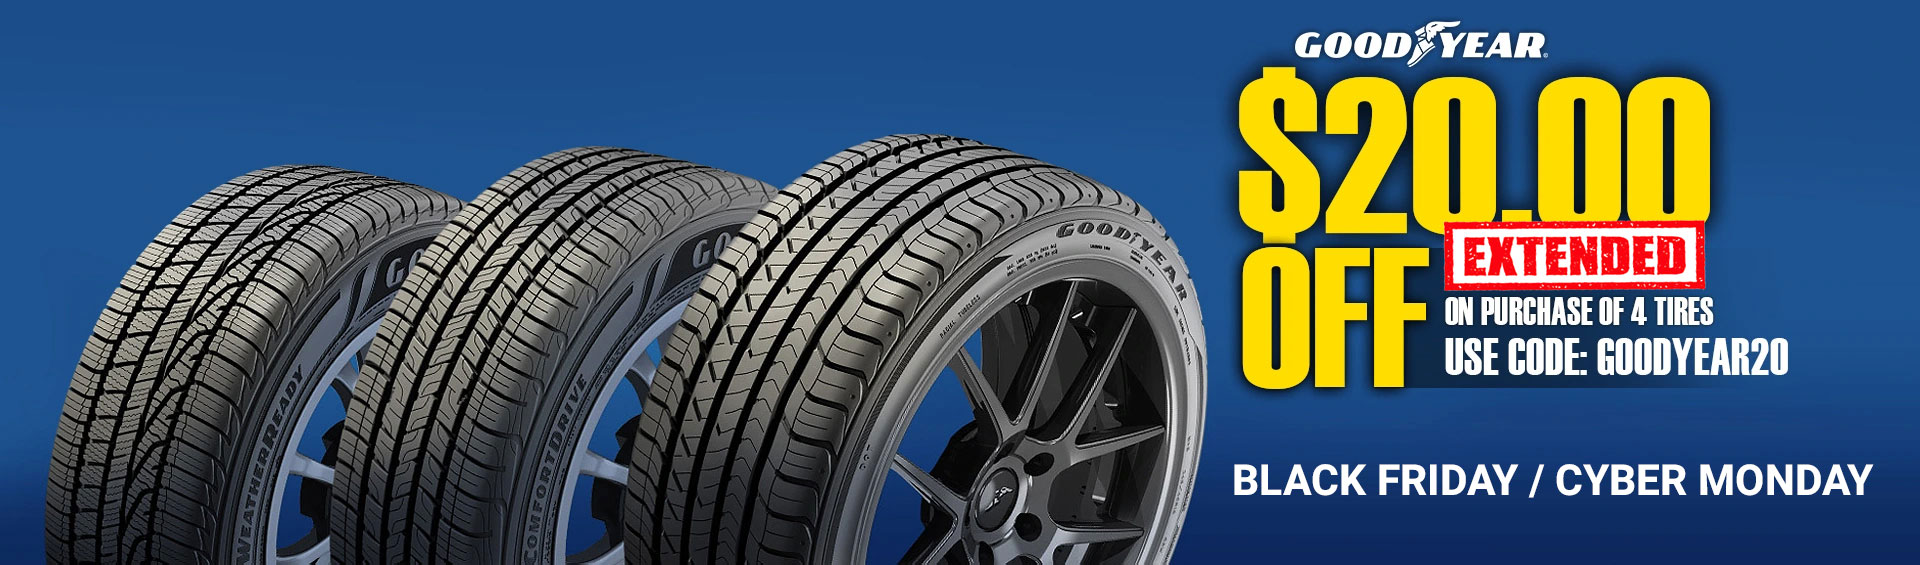 GOODYEAR @$0 OFF ON SET OF 4 TIRES!! 